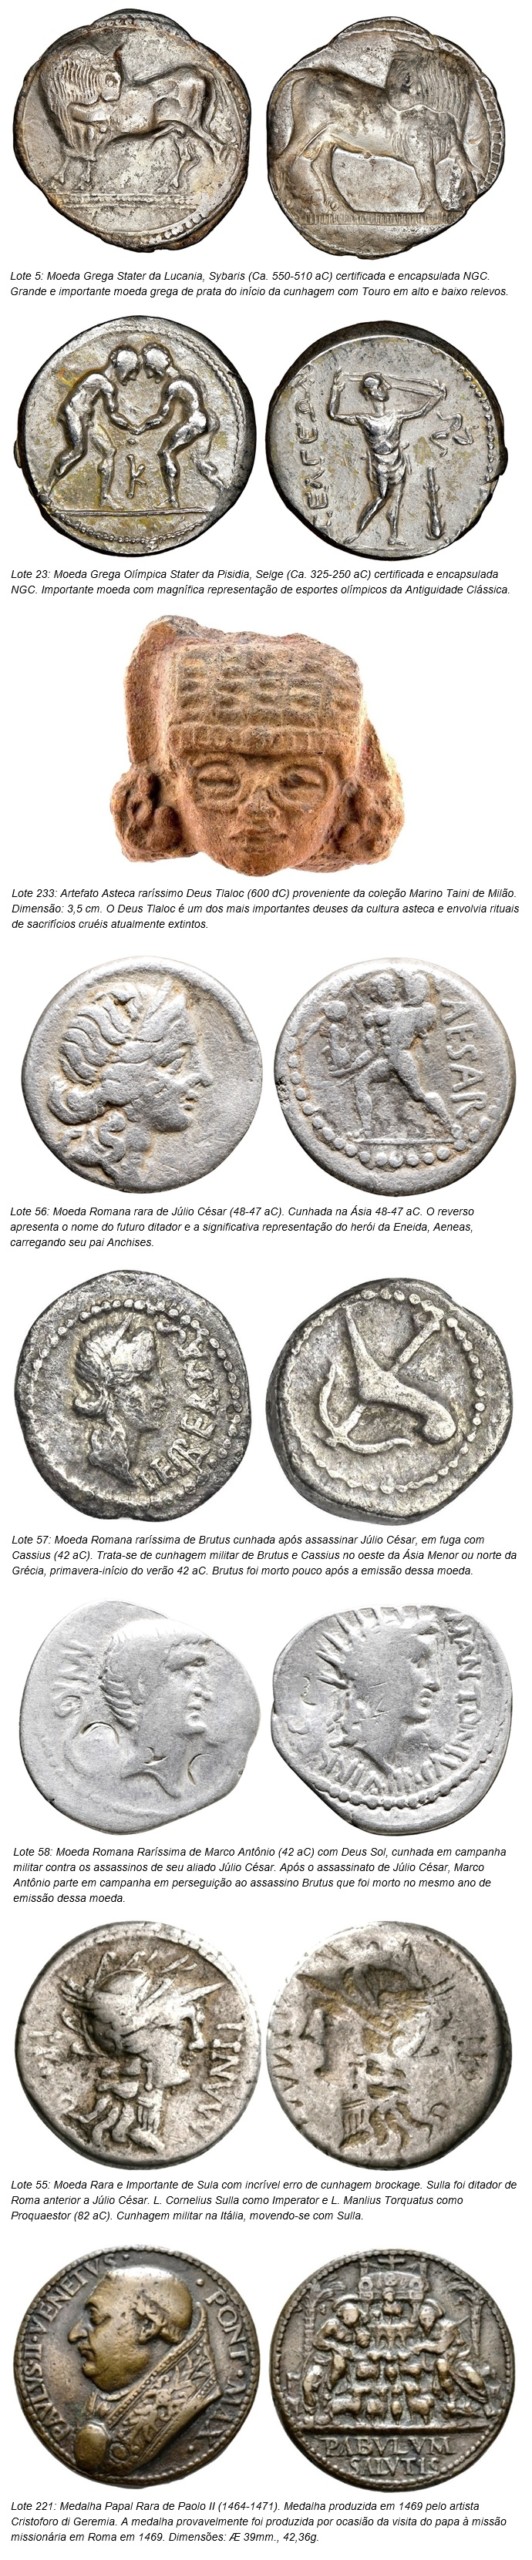 Flávia Cardoso Soares Auctions: 5º Conatus Coins Auction of Coins and Artifacts of Classical Antiquity (Greek, Romans and Byzantines), highlights. Disclosure.